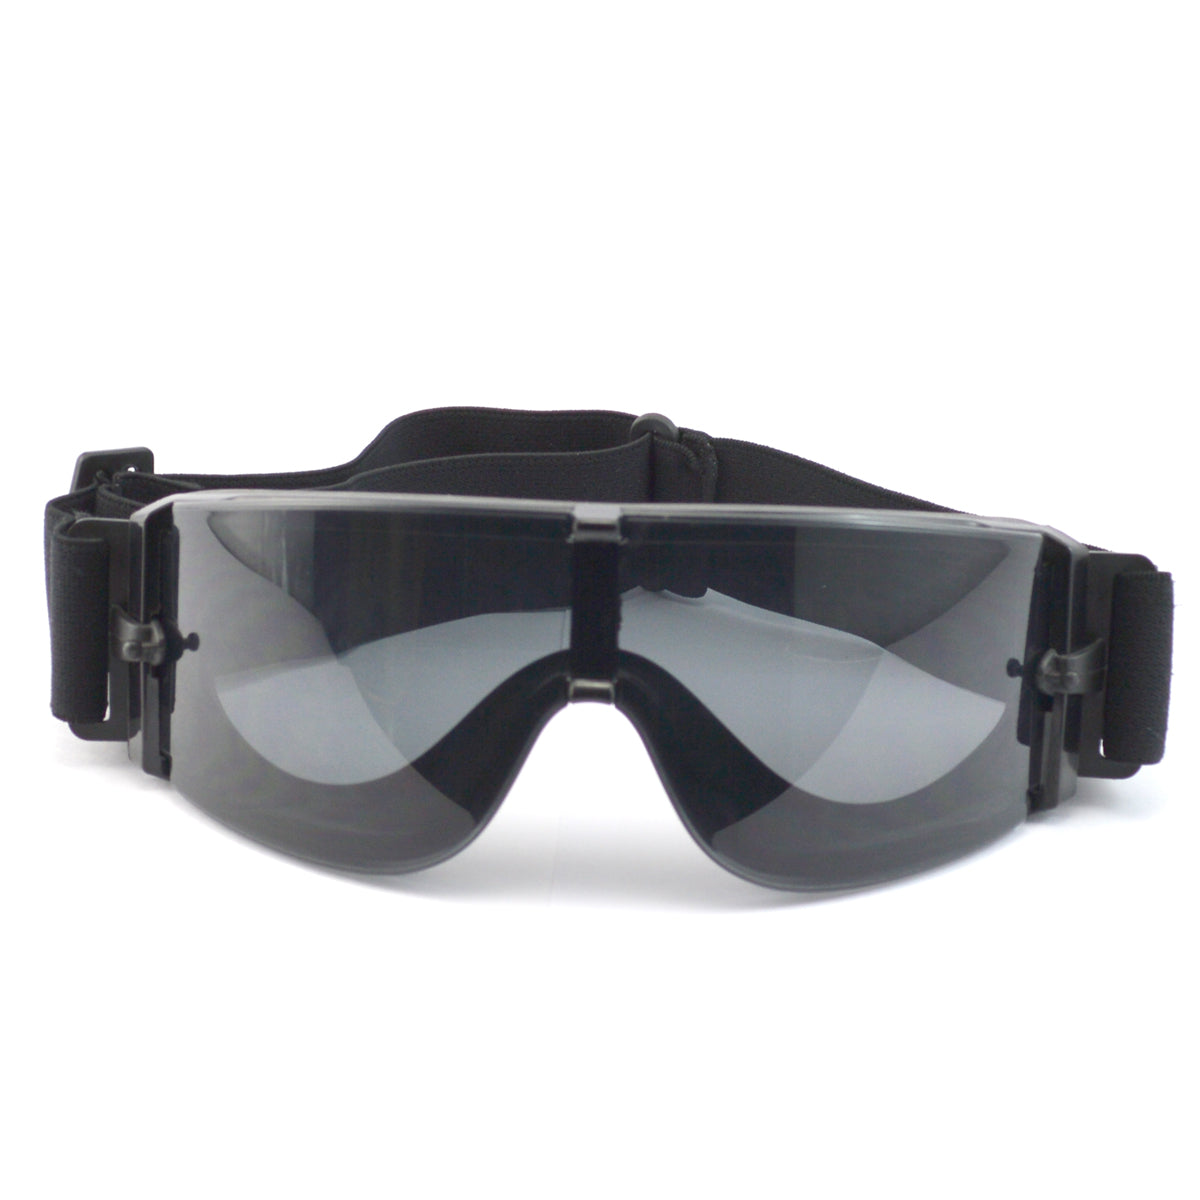 Semi-goggle style cycling sunglasses with interchangeable color lenses